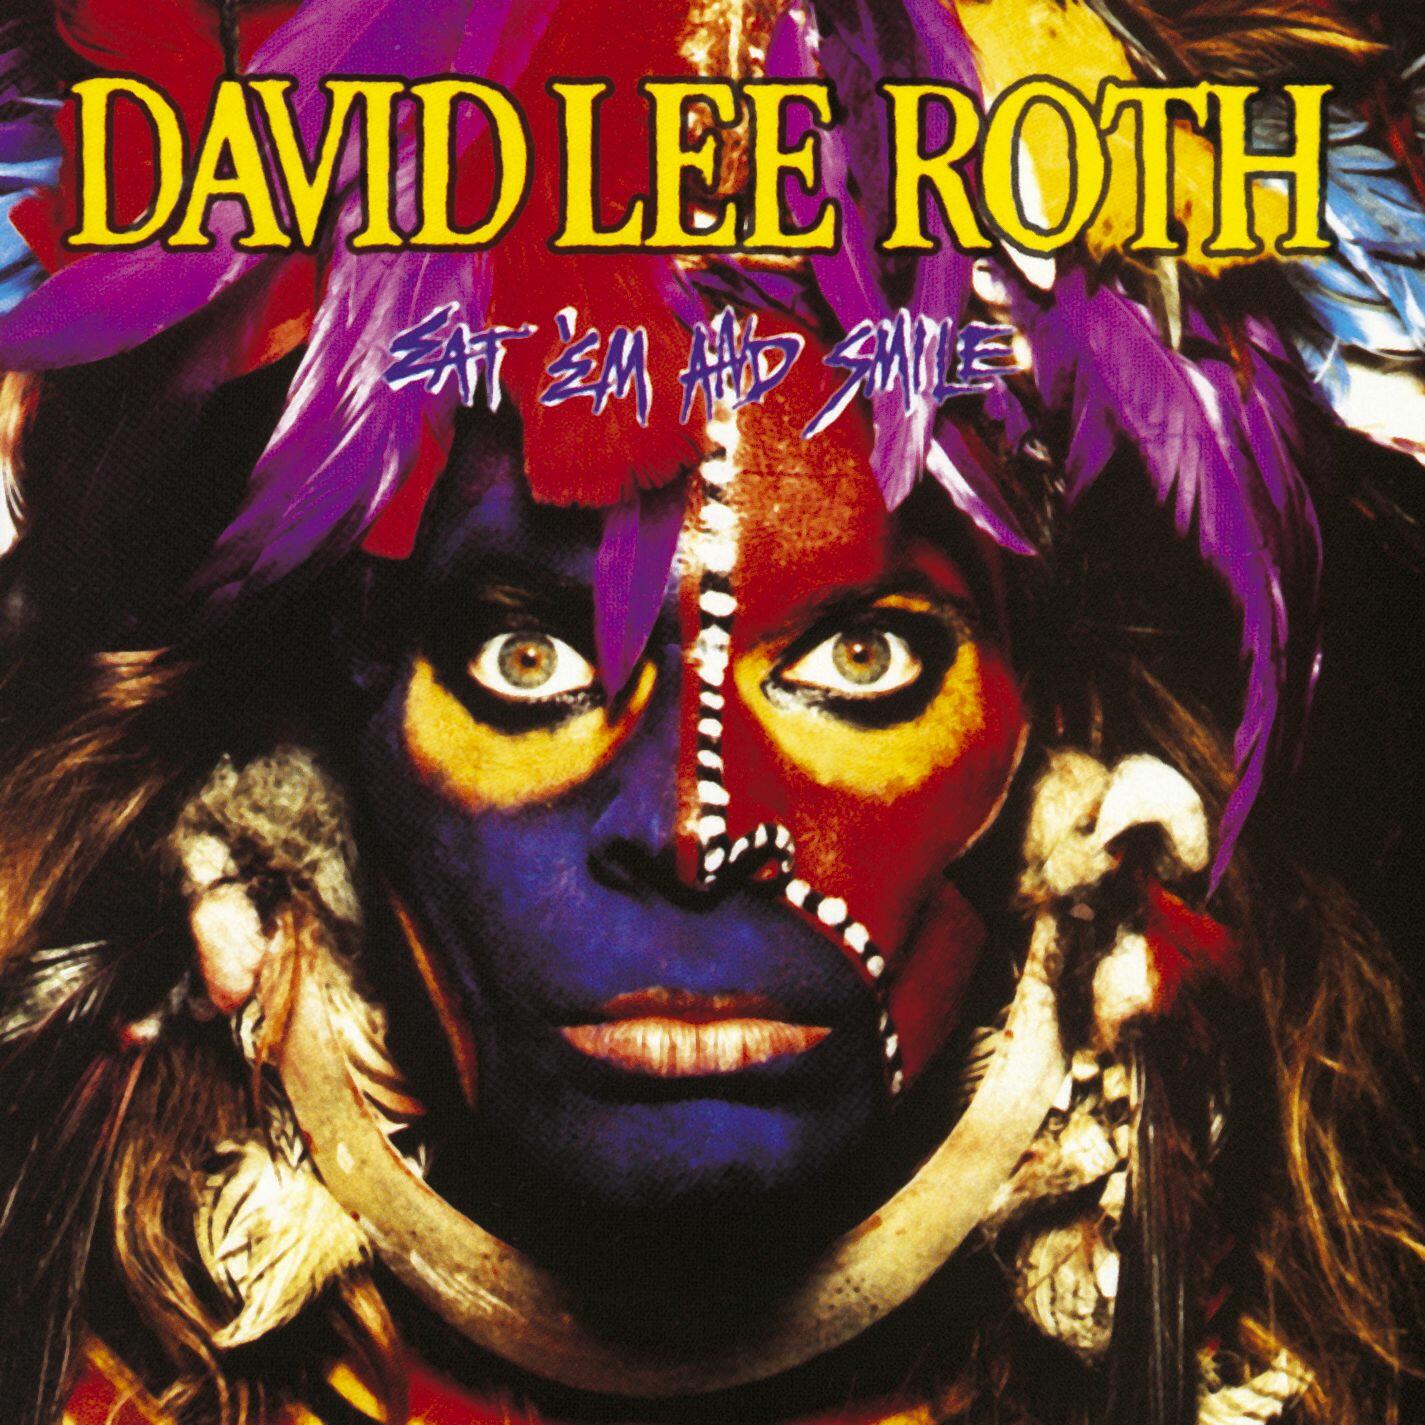 Listen Free To David Lee Roth Eat Em And Smile Radio On Iheartradio 